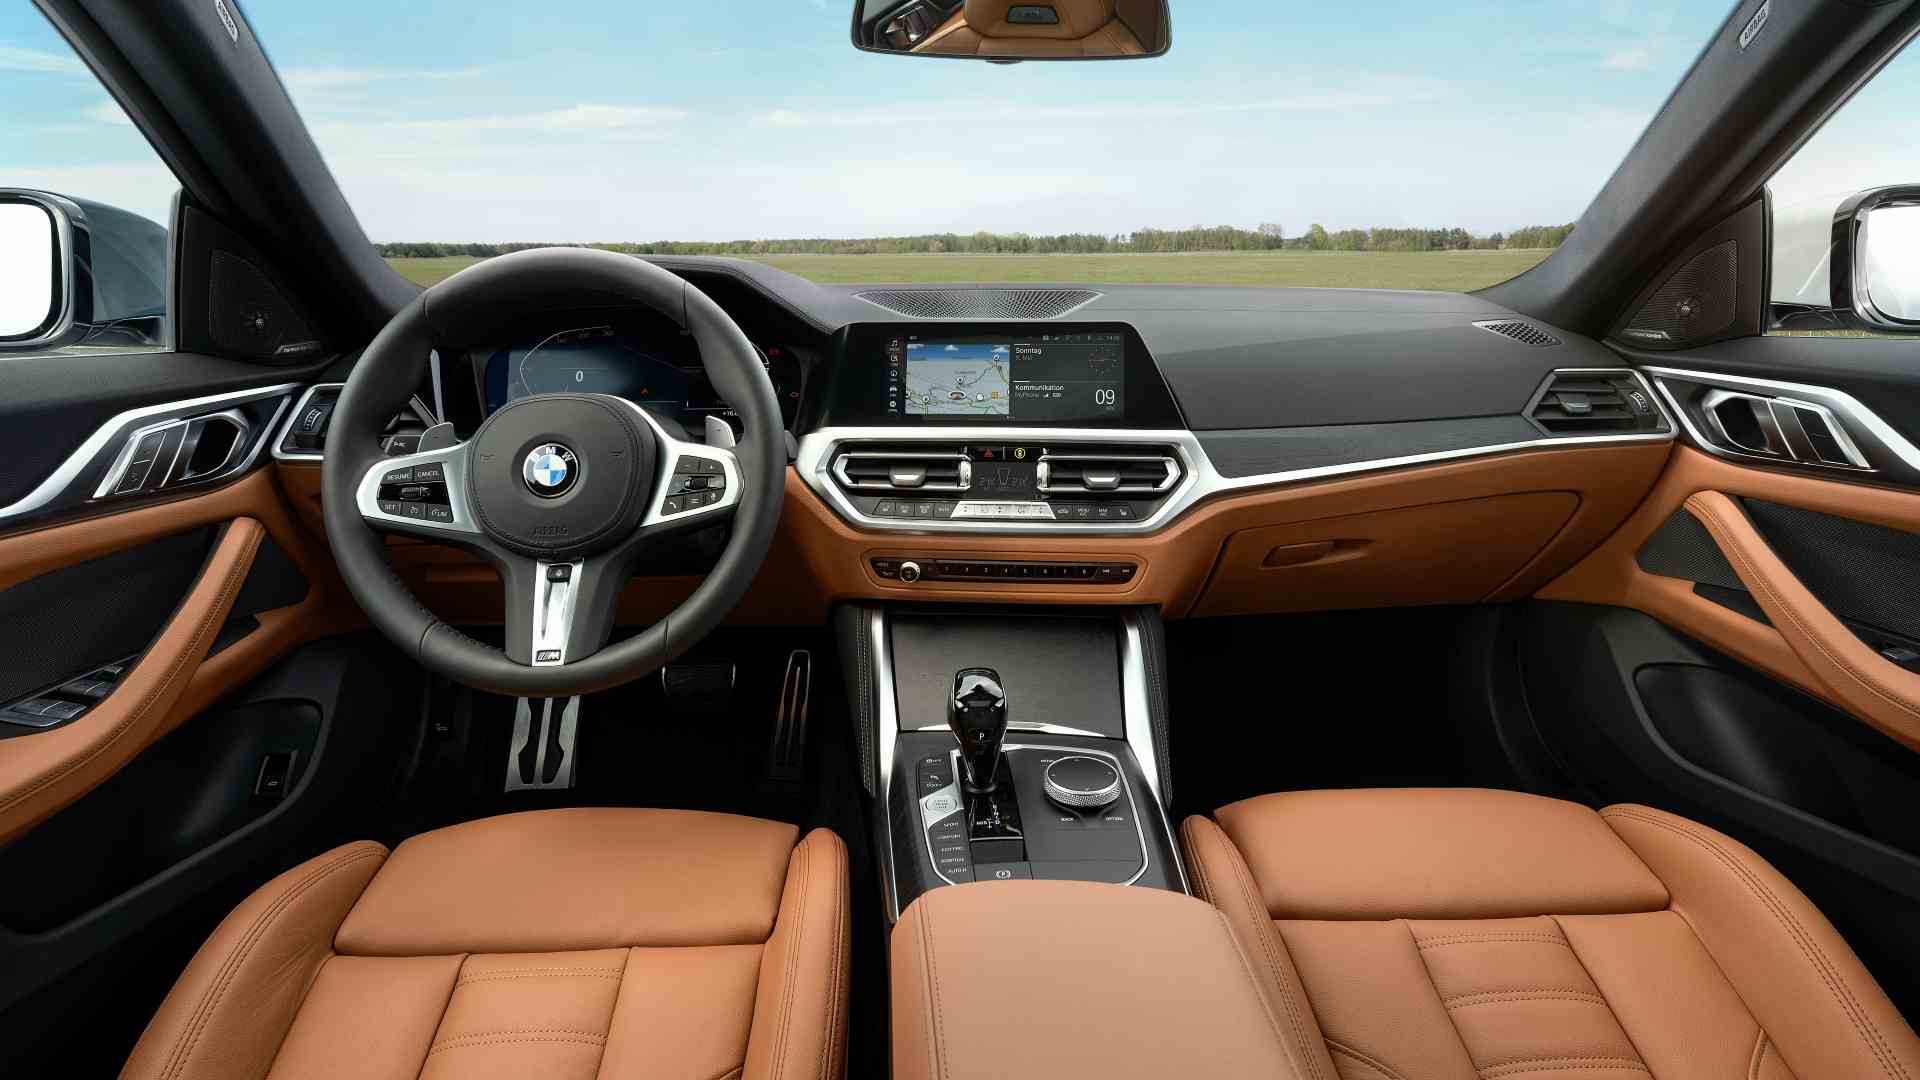 Inside, the new 4 Series Gran Coupe gets a 10.25-inch infotainment display with a 12.3-inch digital instruments display. Image: BMW